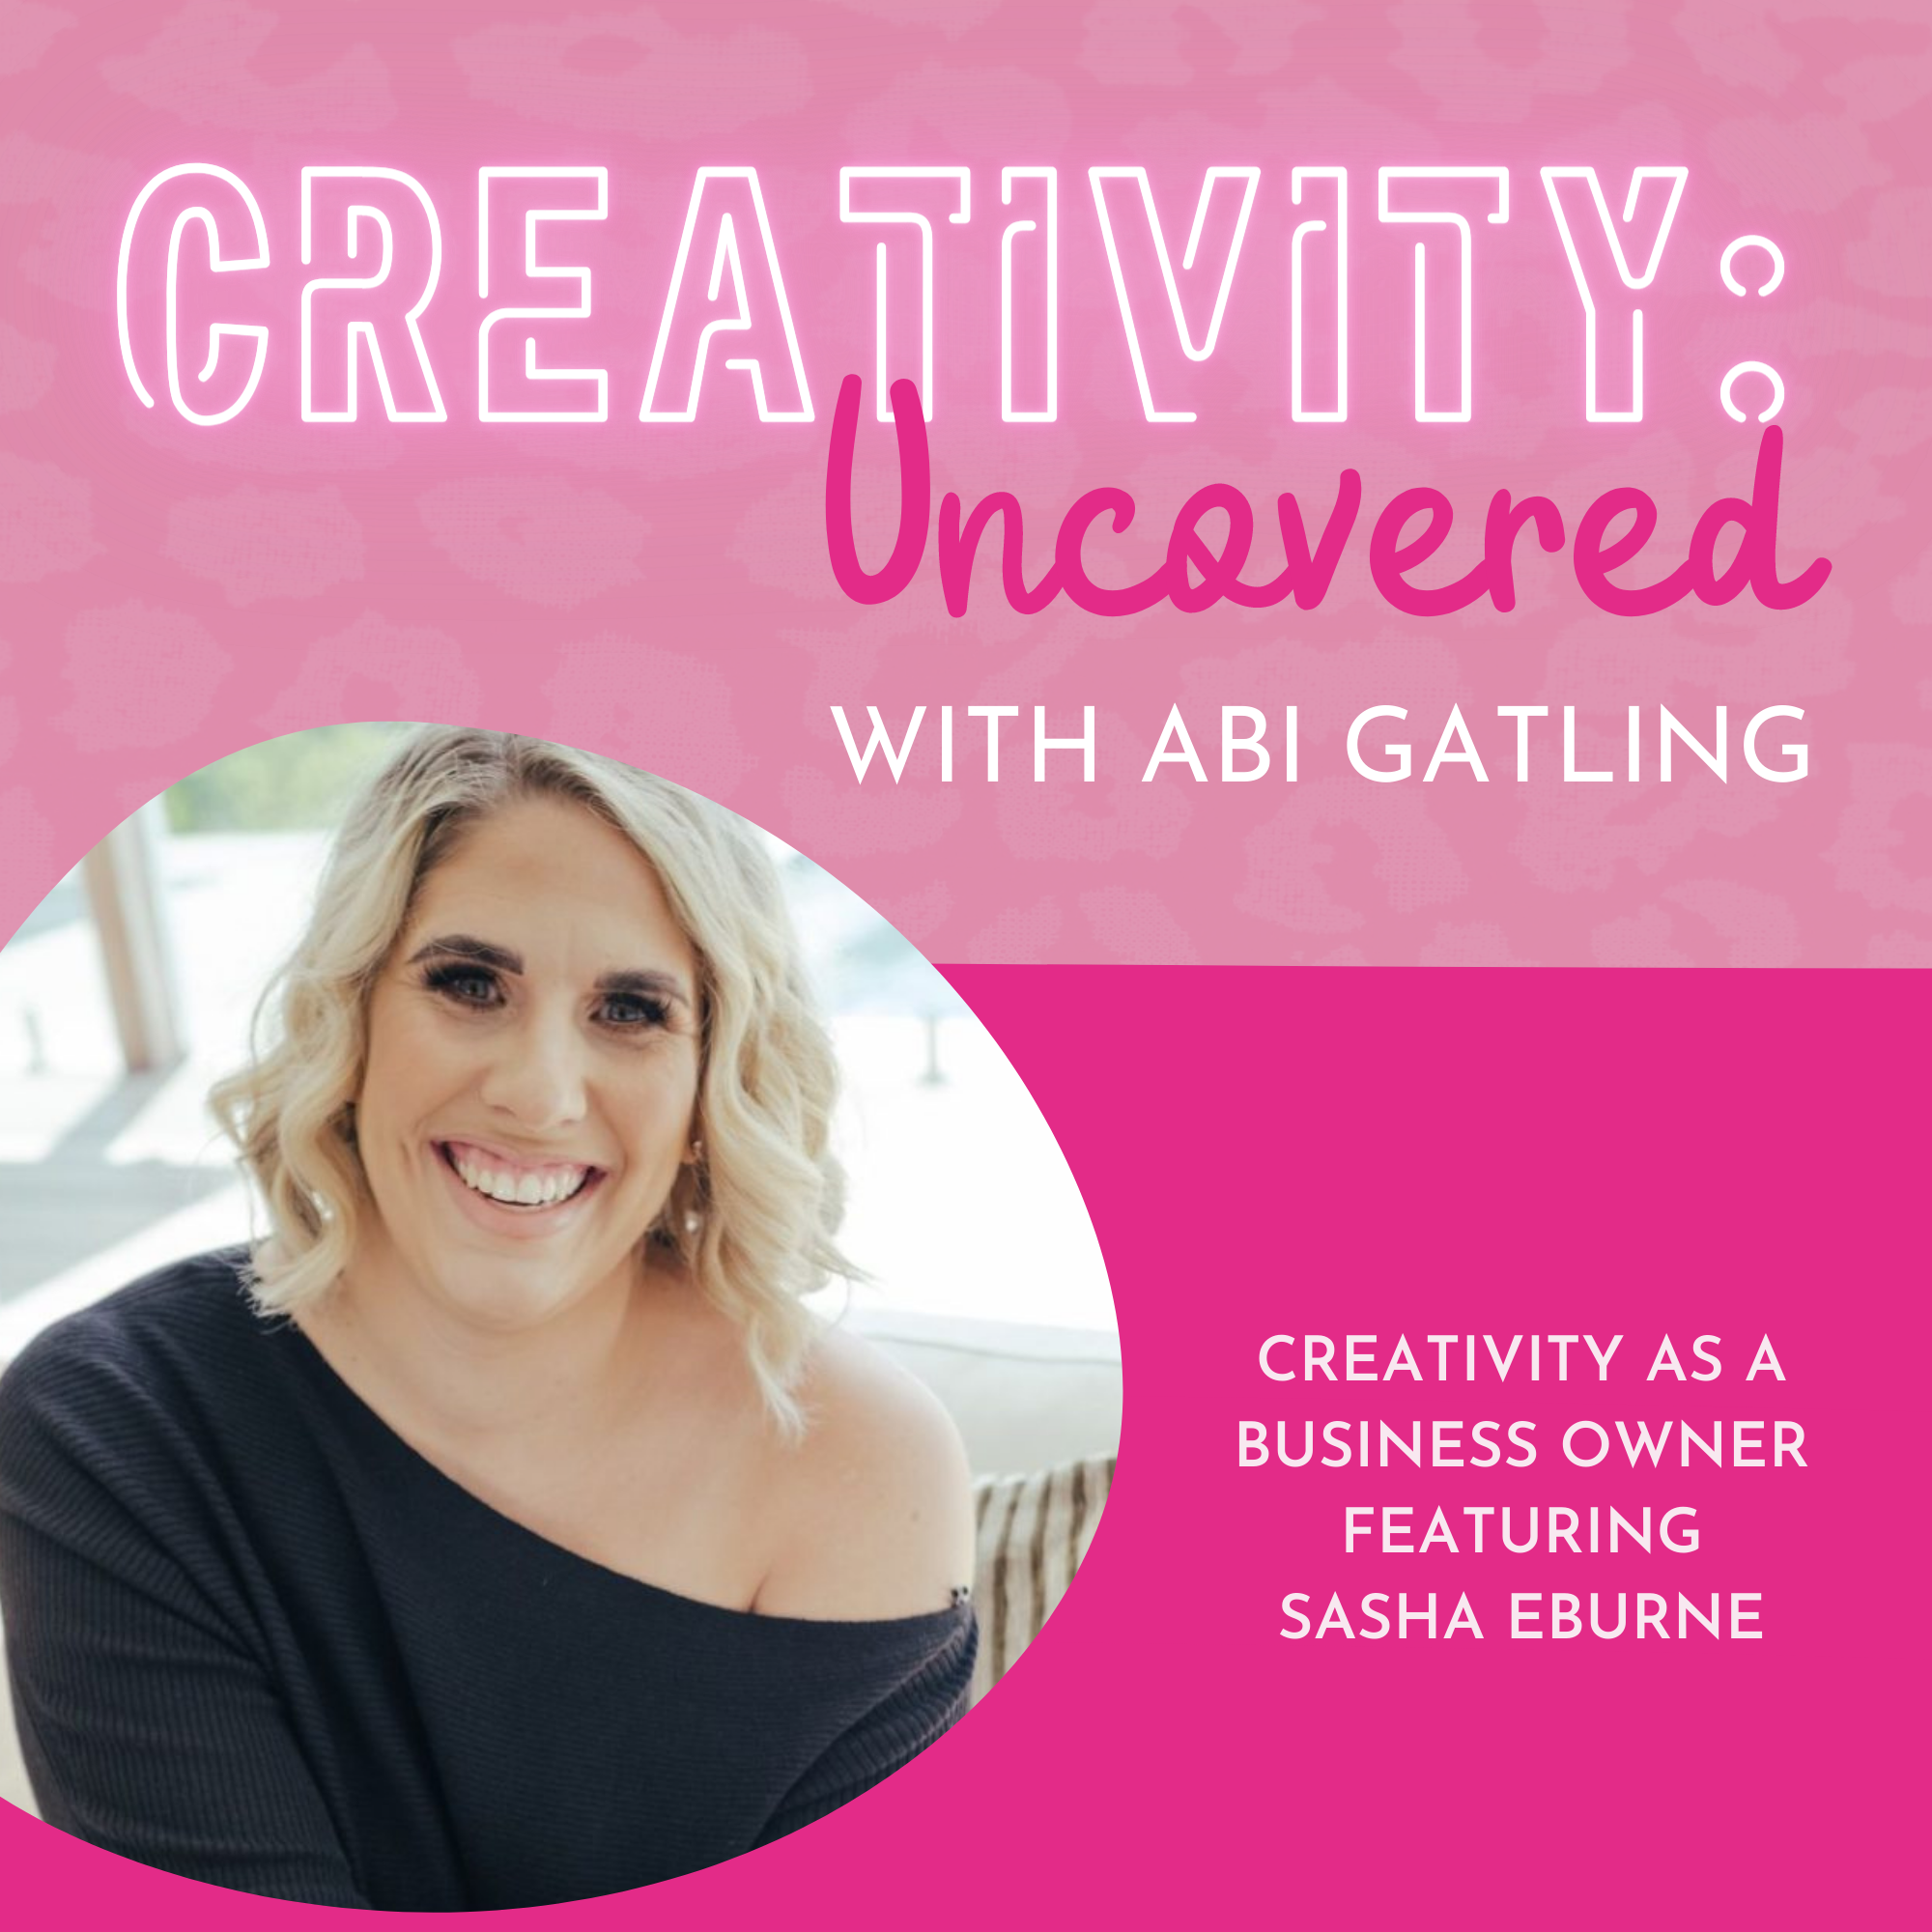 Creativity: Uncovered podcast episode graphic featuring guest Sasha Eburne